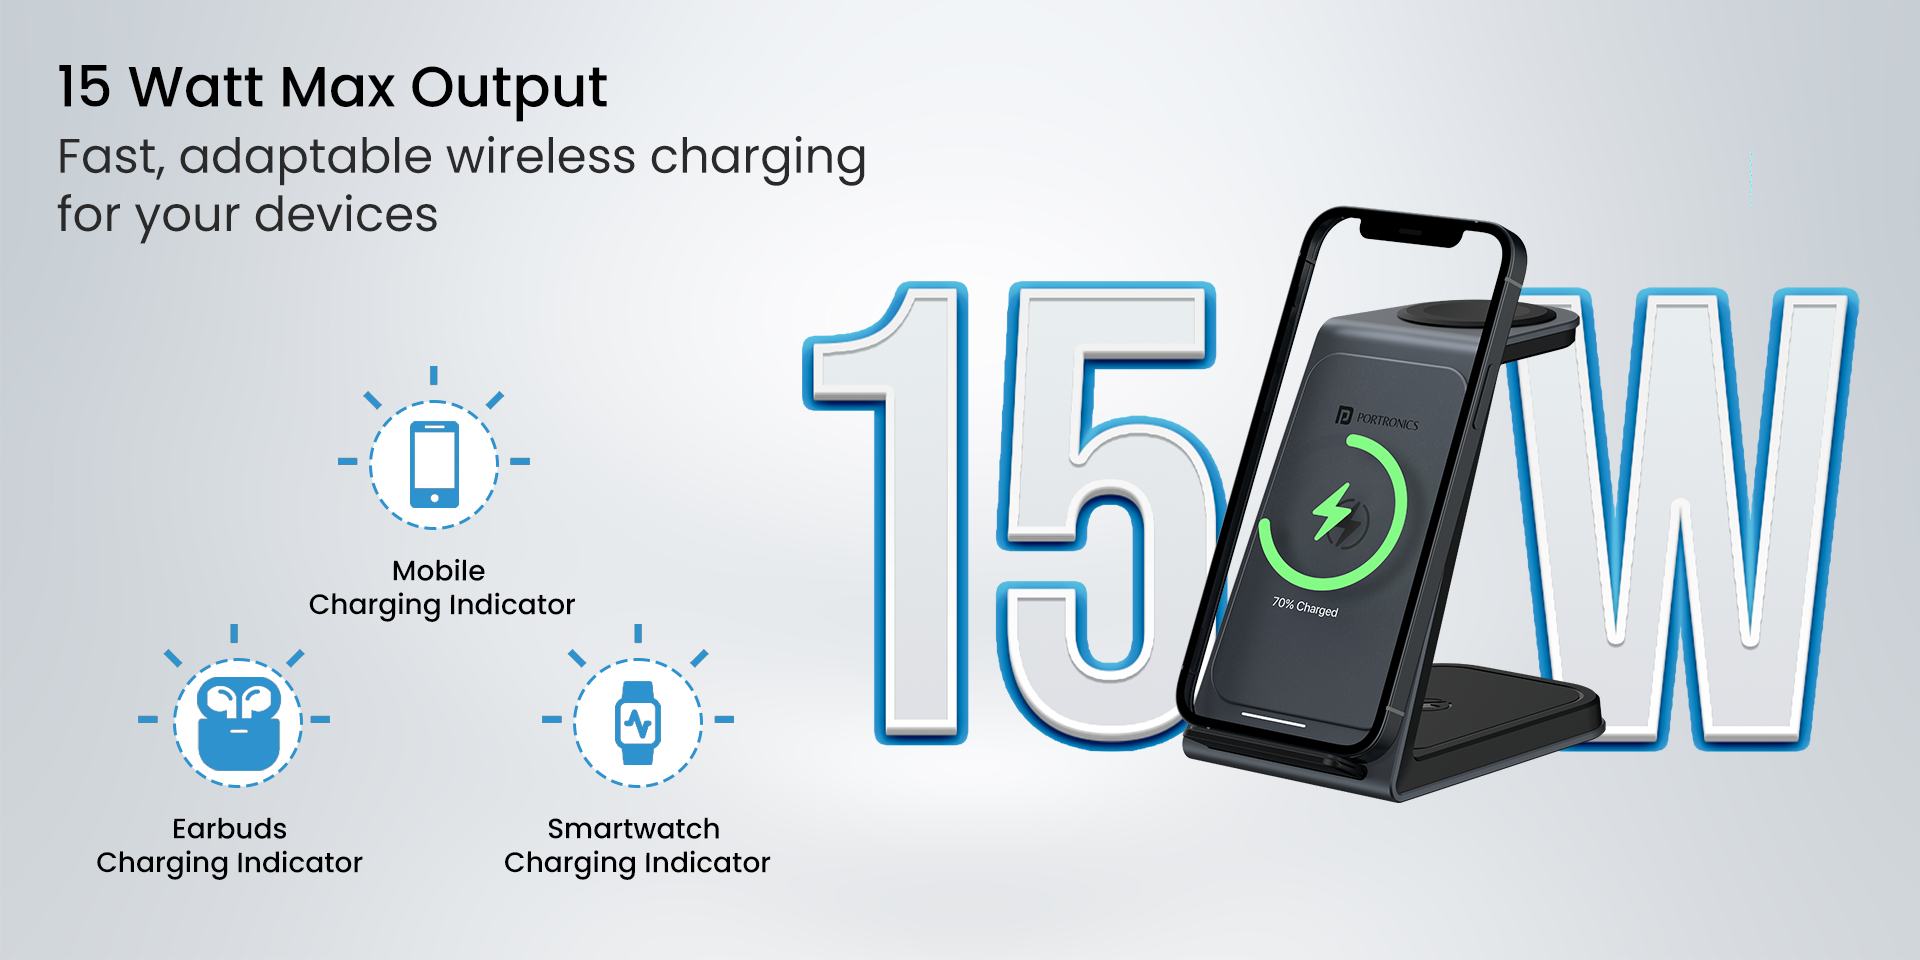 Portronics Freedom trio 3 in 1 Wireless fast Charger with 15w max output